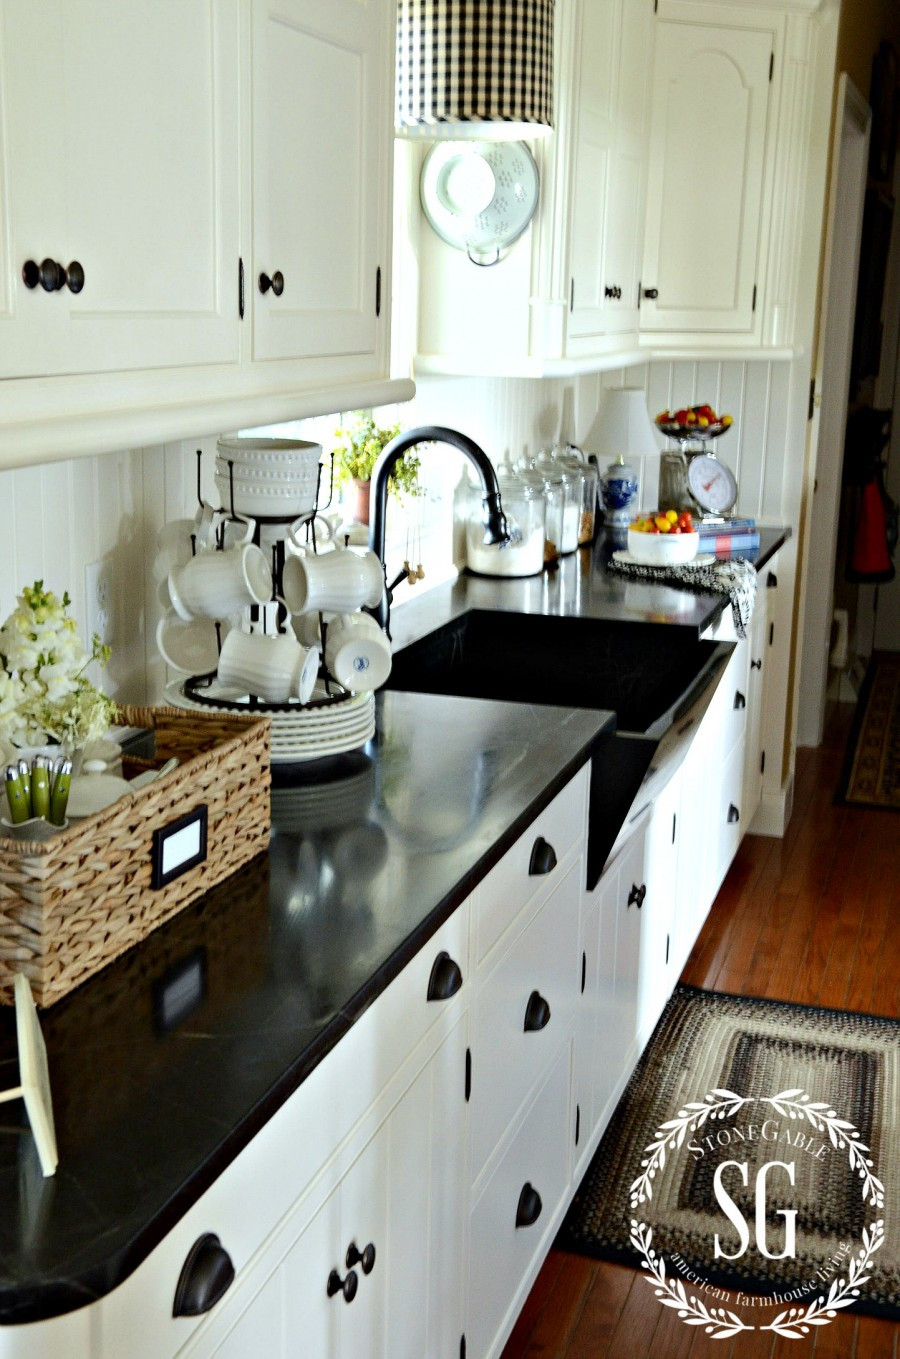 White Farmhouse Kitchen Cabinets
 WHAT IS FARMHOUSE STYLE AND 10 WAYS TO GET IT StoneGable